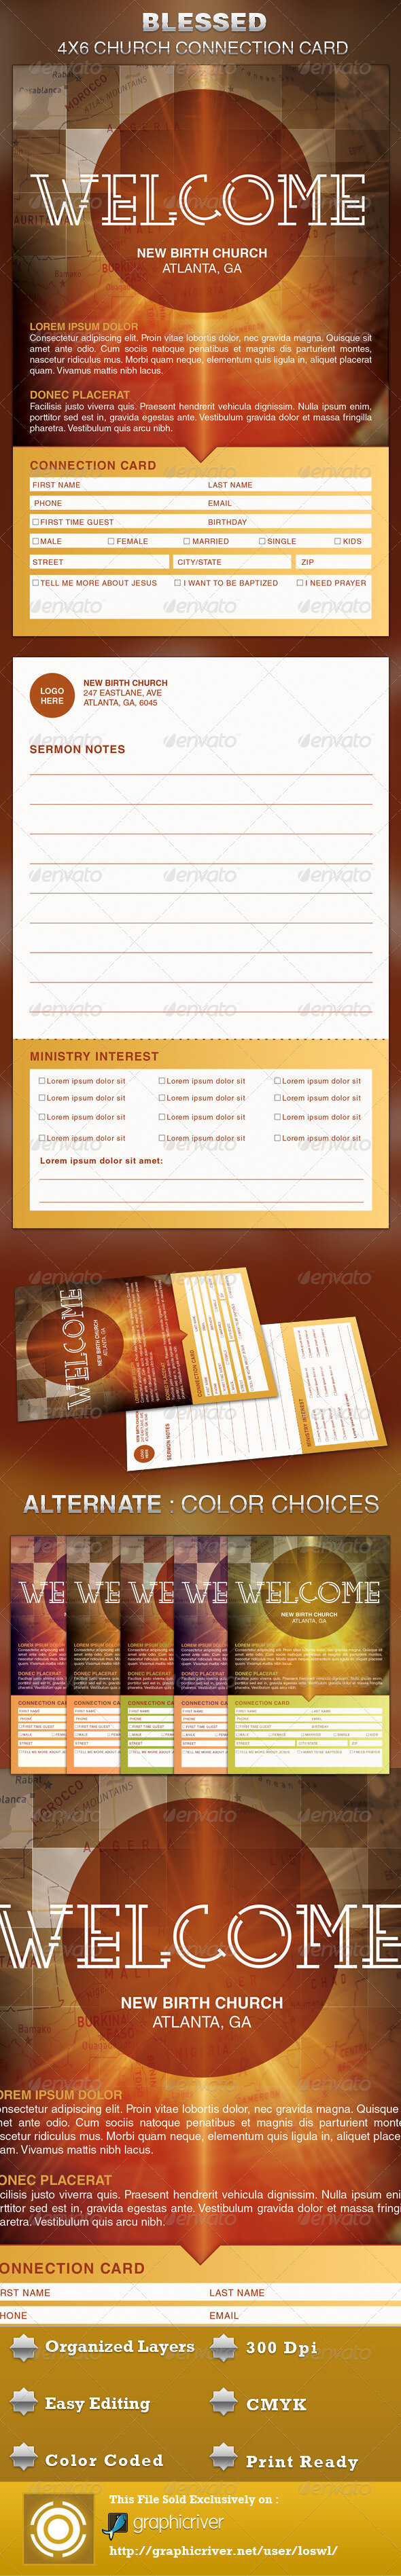 The Blessed Church Connection Card Template Is Great For Any With Regard To Decision Card Template